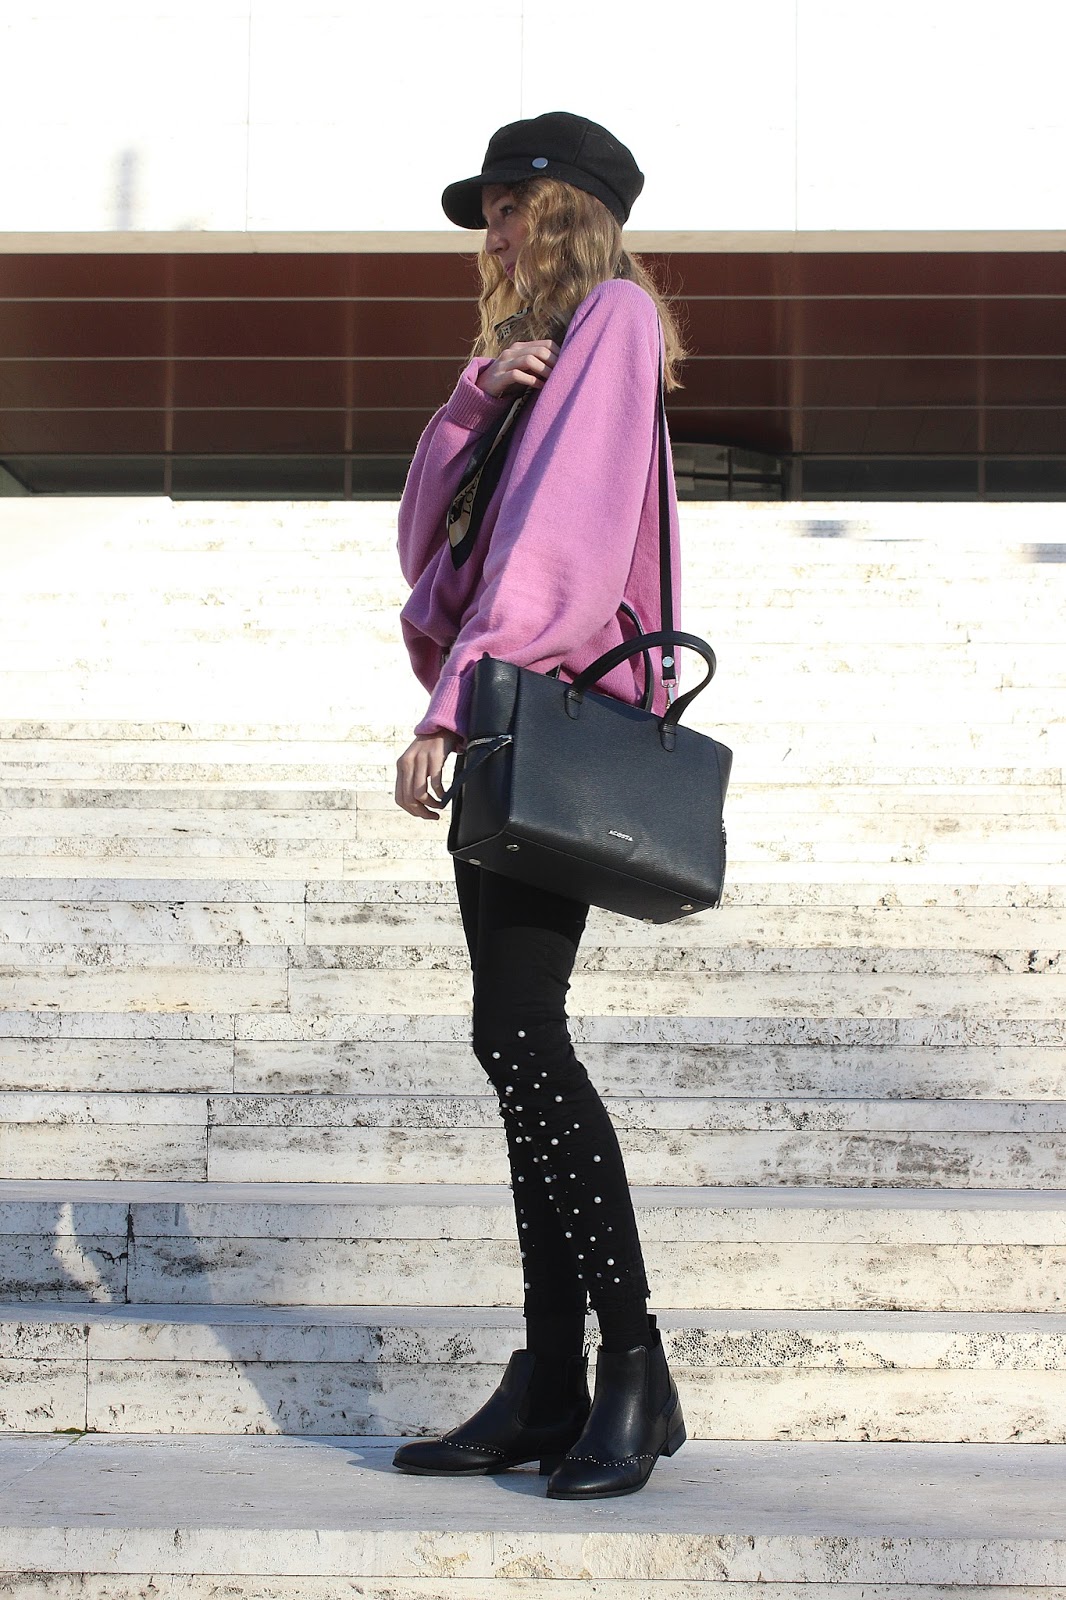 pearl-jeans-lilac-sweater-louis-vuitton-scarf-acosta-carmen-bolso-navy-cap-street-style